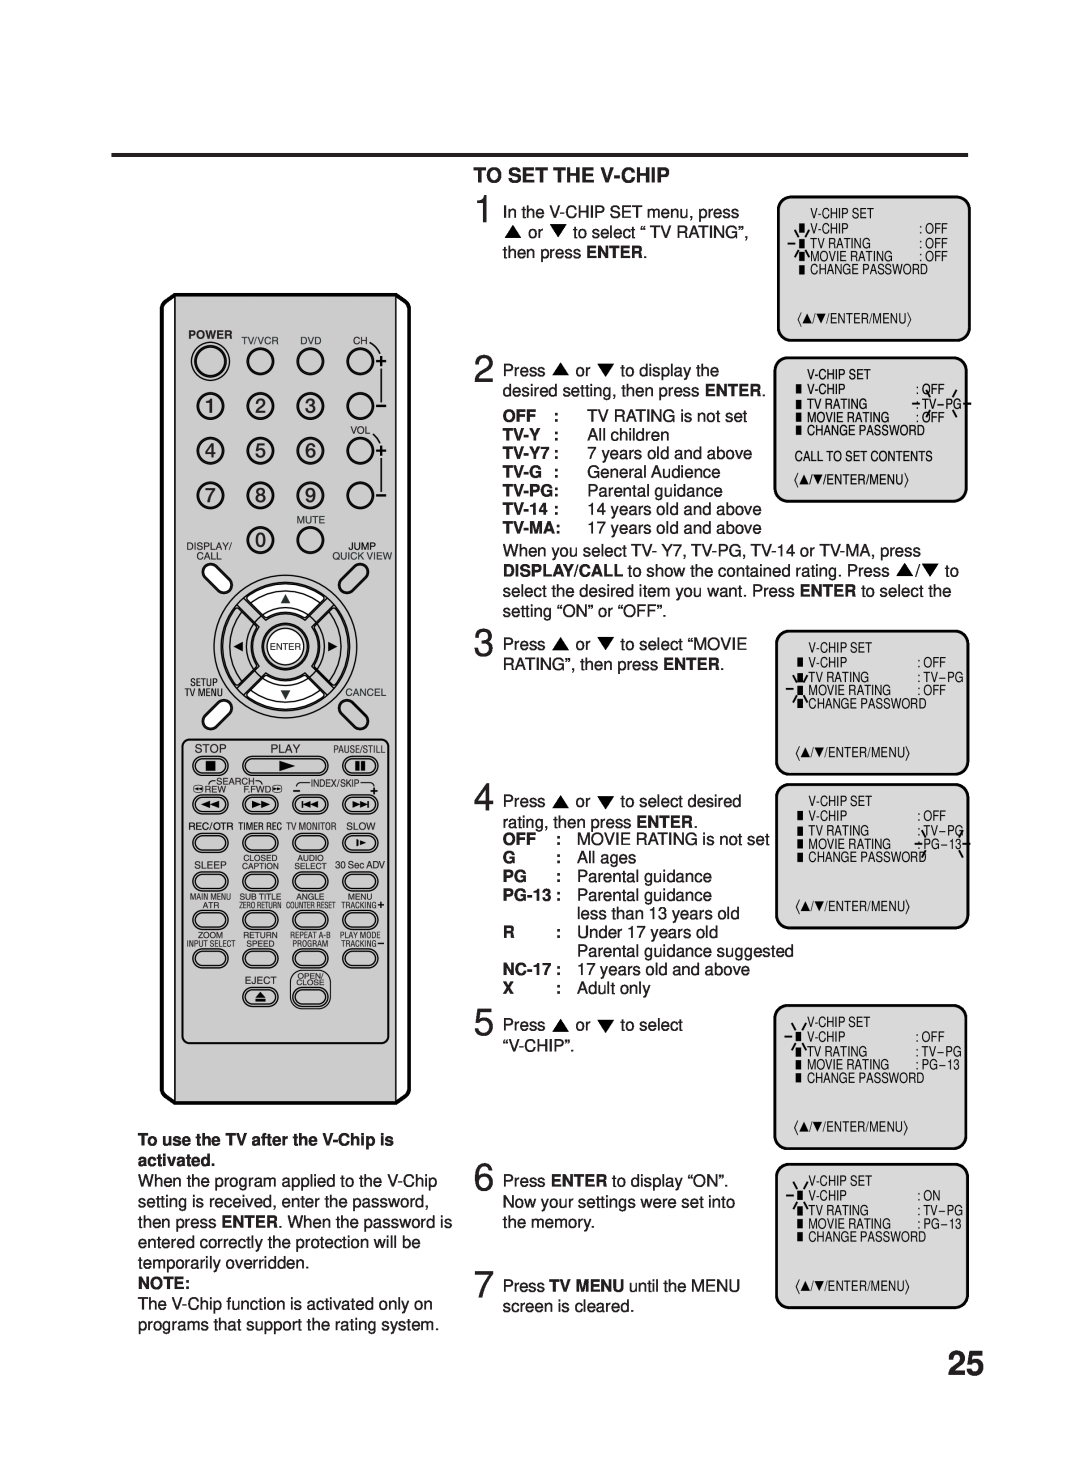 RCA 27F500TDV manual To use the TV after the V-Chip is activated, Tv-Y, TV-Y7, Tv-G, Tv-Pg, TV-14, Tv-Ma 